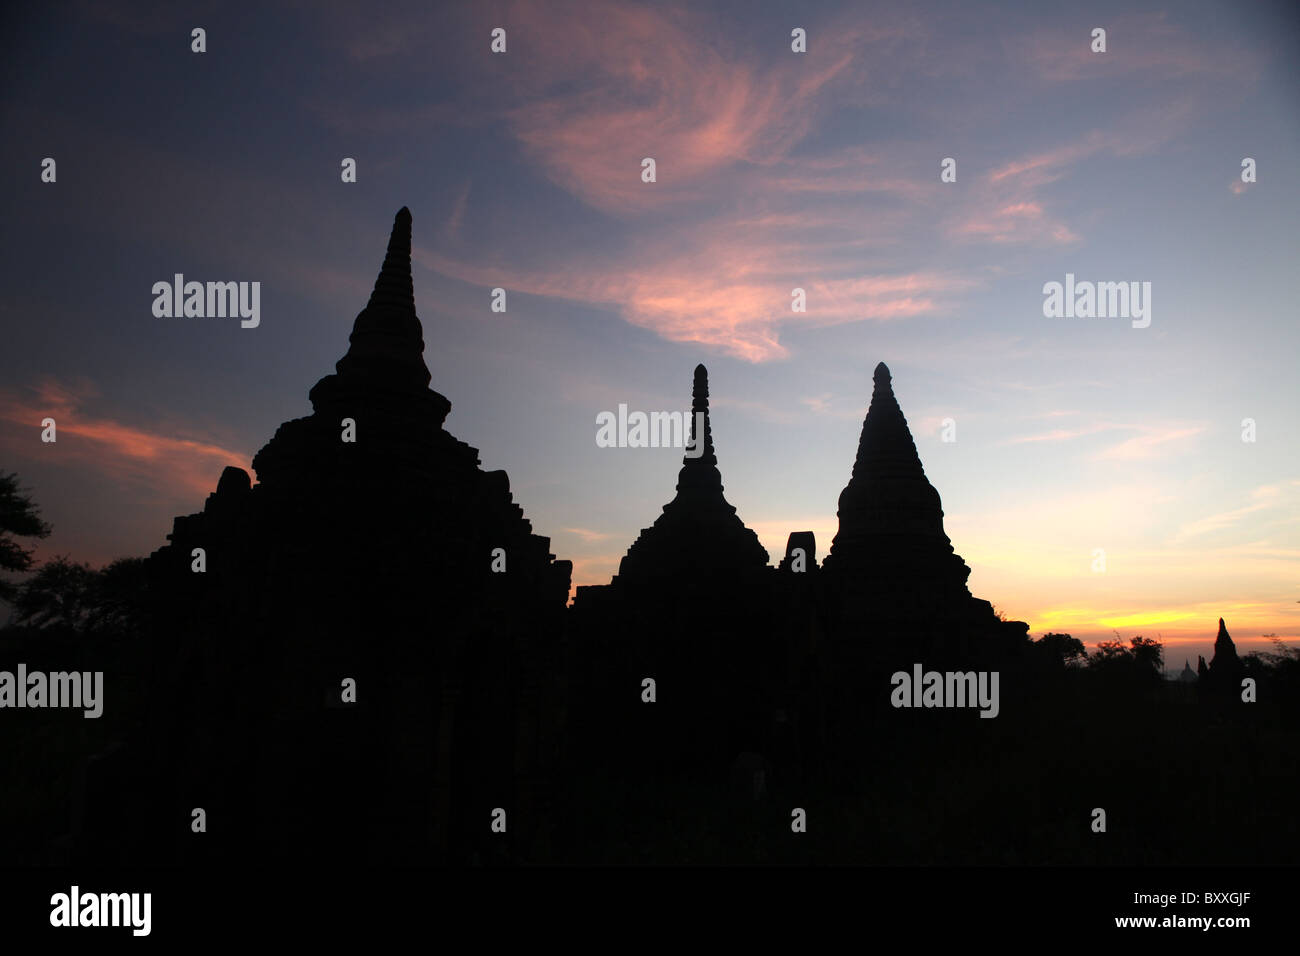 Silhouettes of Buddhist temples or pagodas at sunset in Bagan, Myanmar or Burma. Stock Photo